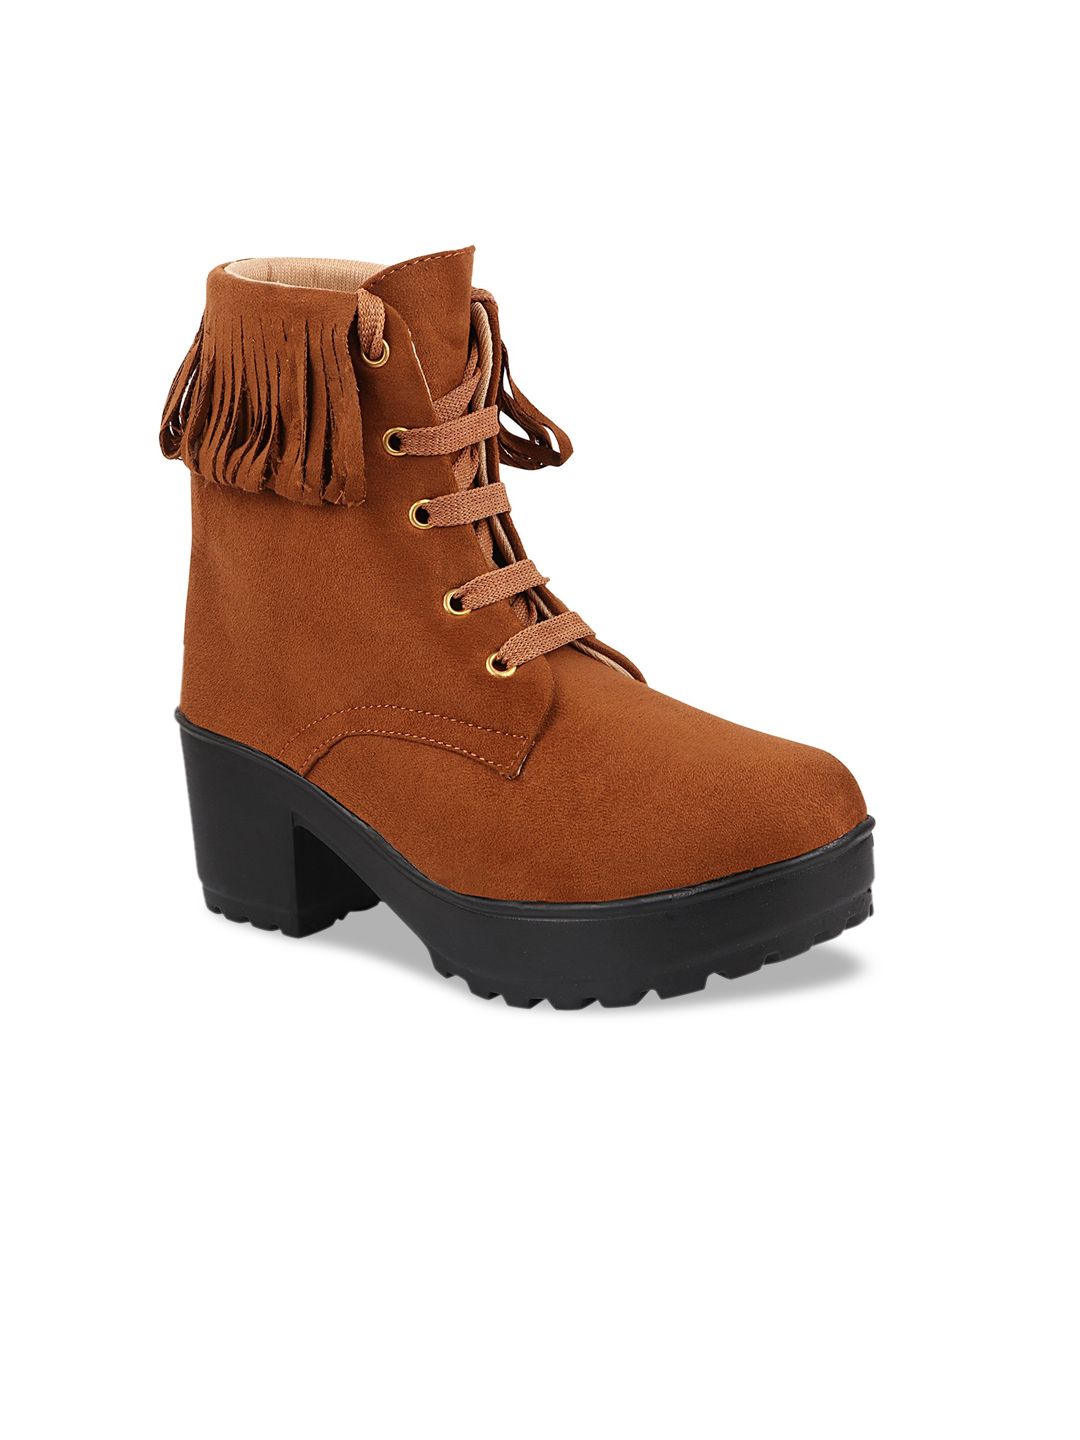 Shoetopia Tan Suede Block Heeled Boots with Tassels Price in India